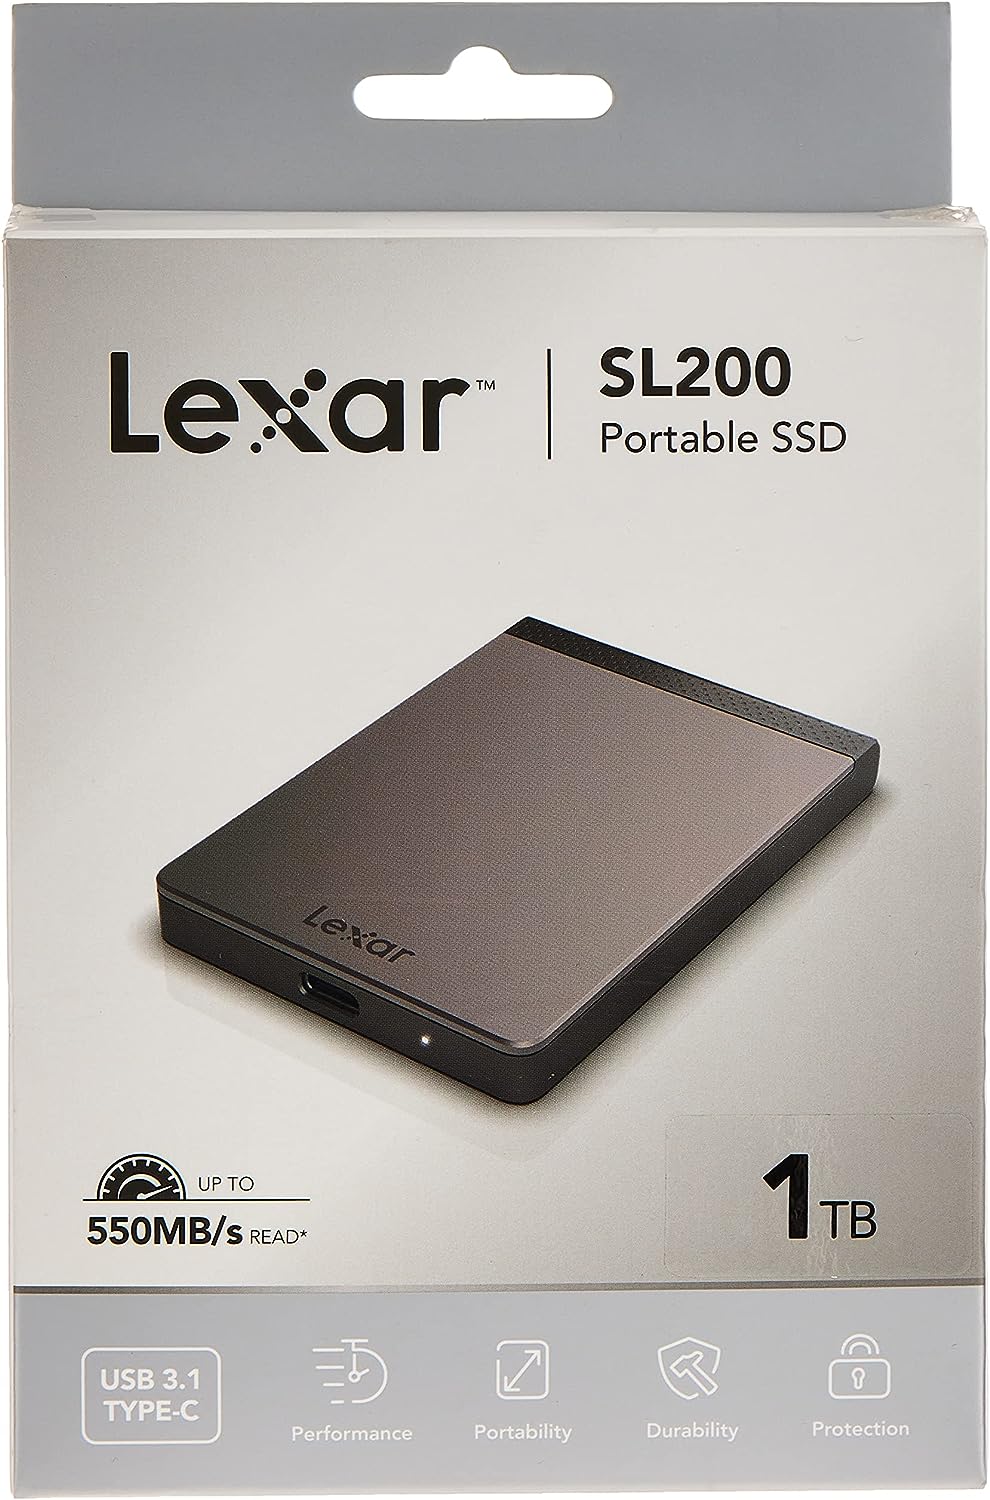 Lexar SL200 Portable Solid State Drive, 500MB/s Read, 1 TB Capacity